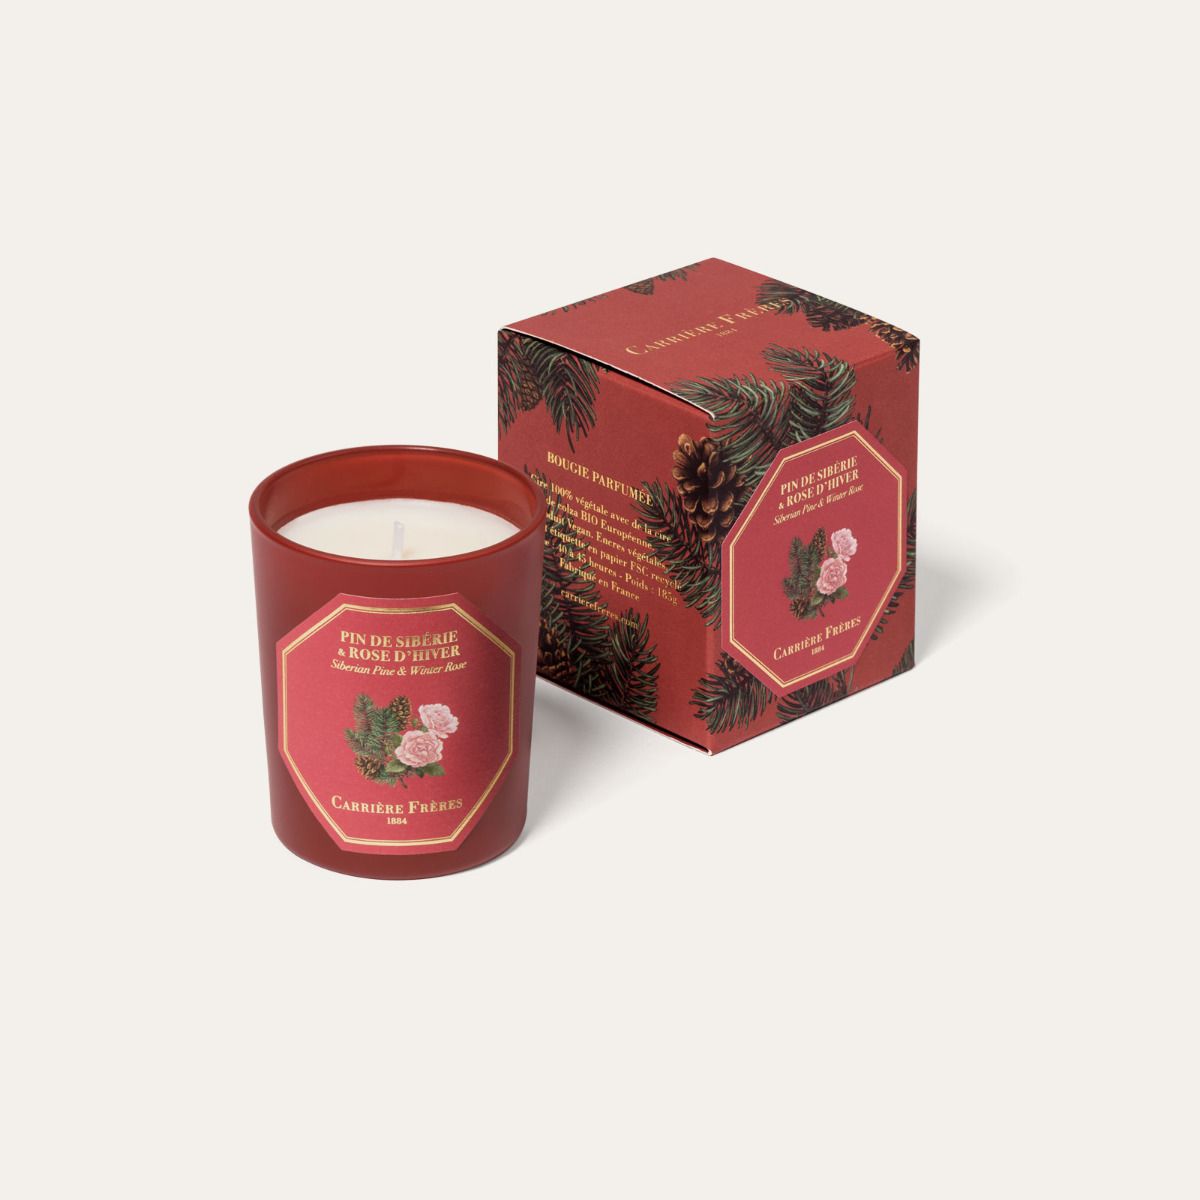 Siberian Pine & Winter Rose Small Candle